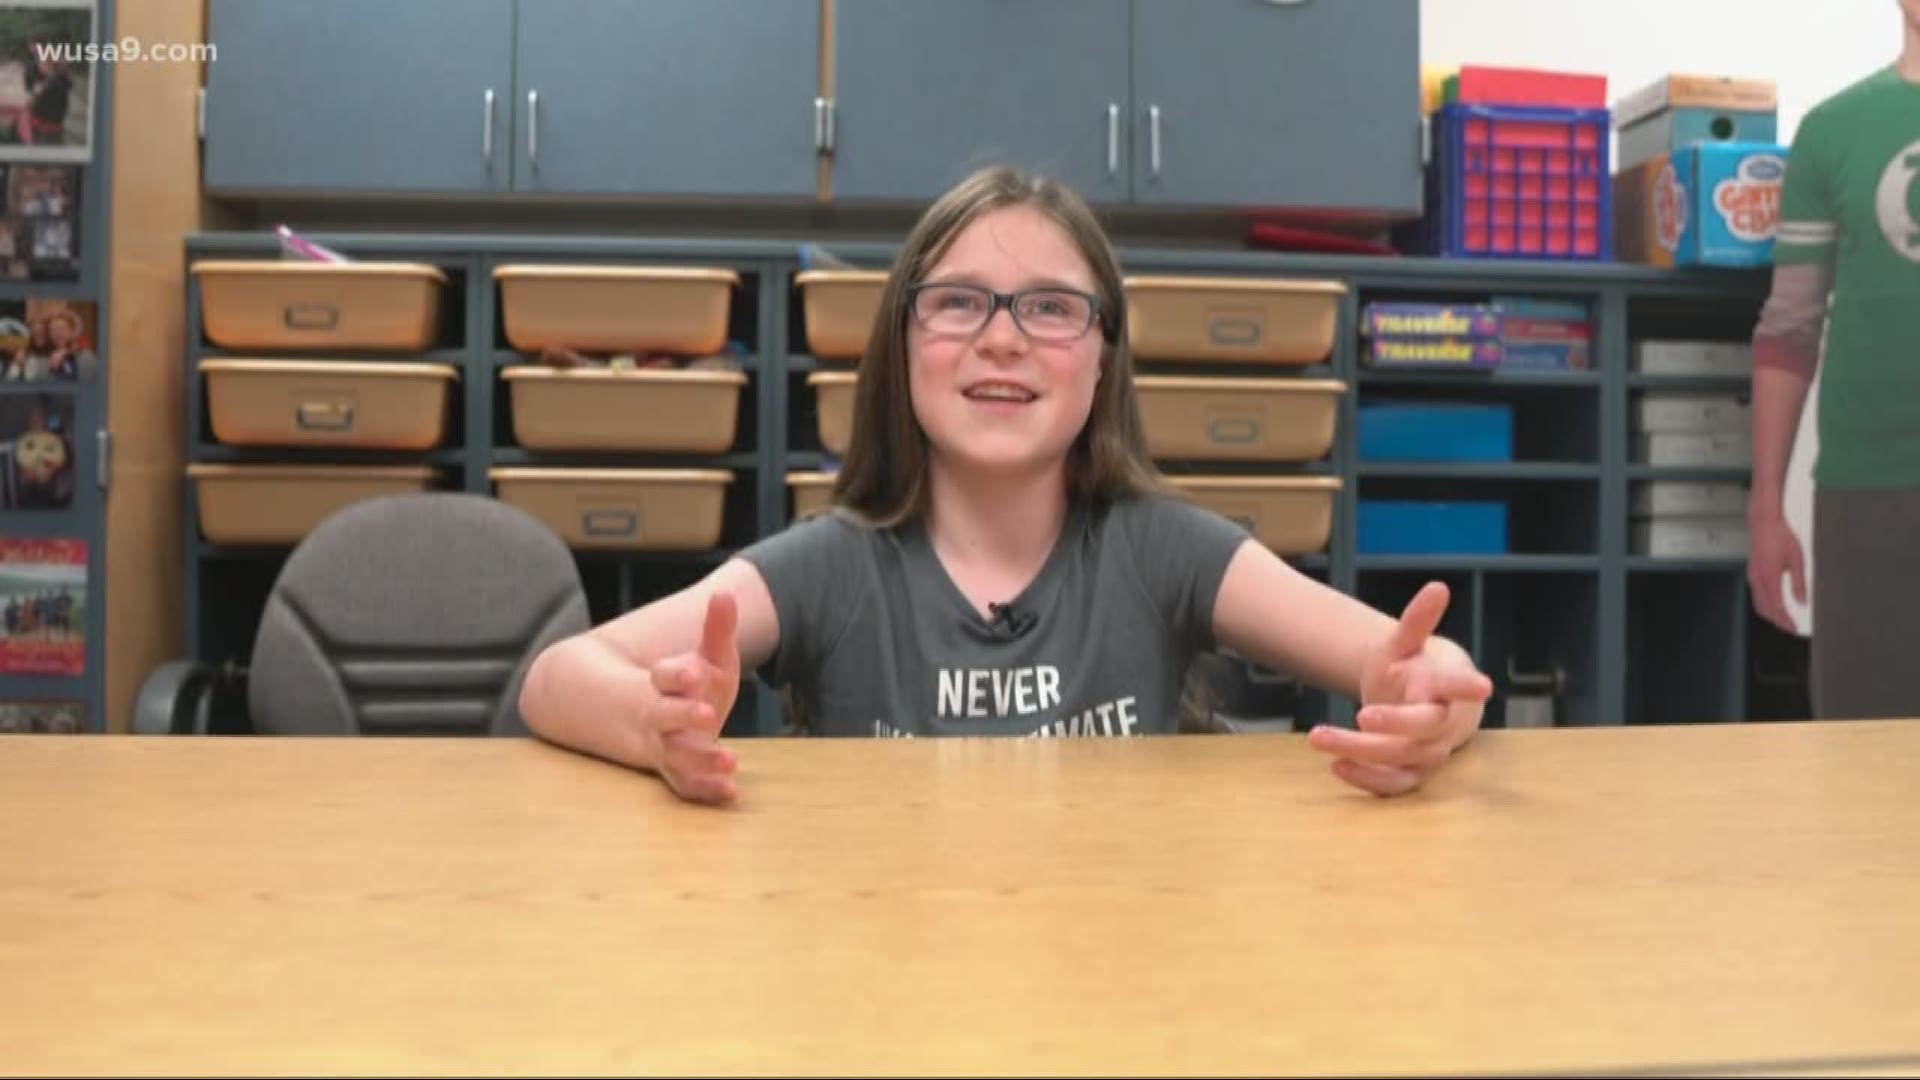 This 10-year-old girl is trying to make a change -- she wants Stafford County Public Schools to stop using plastic straws to save the planet.